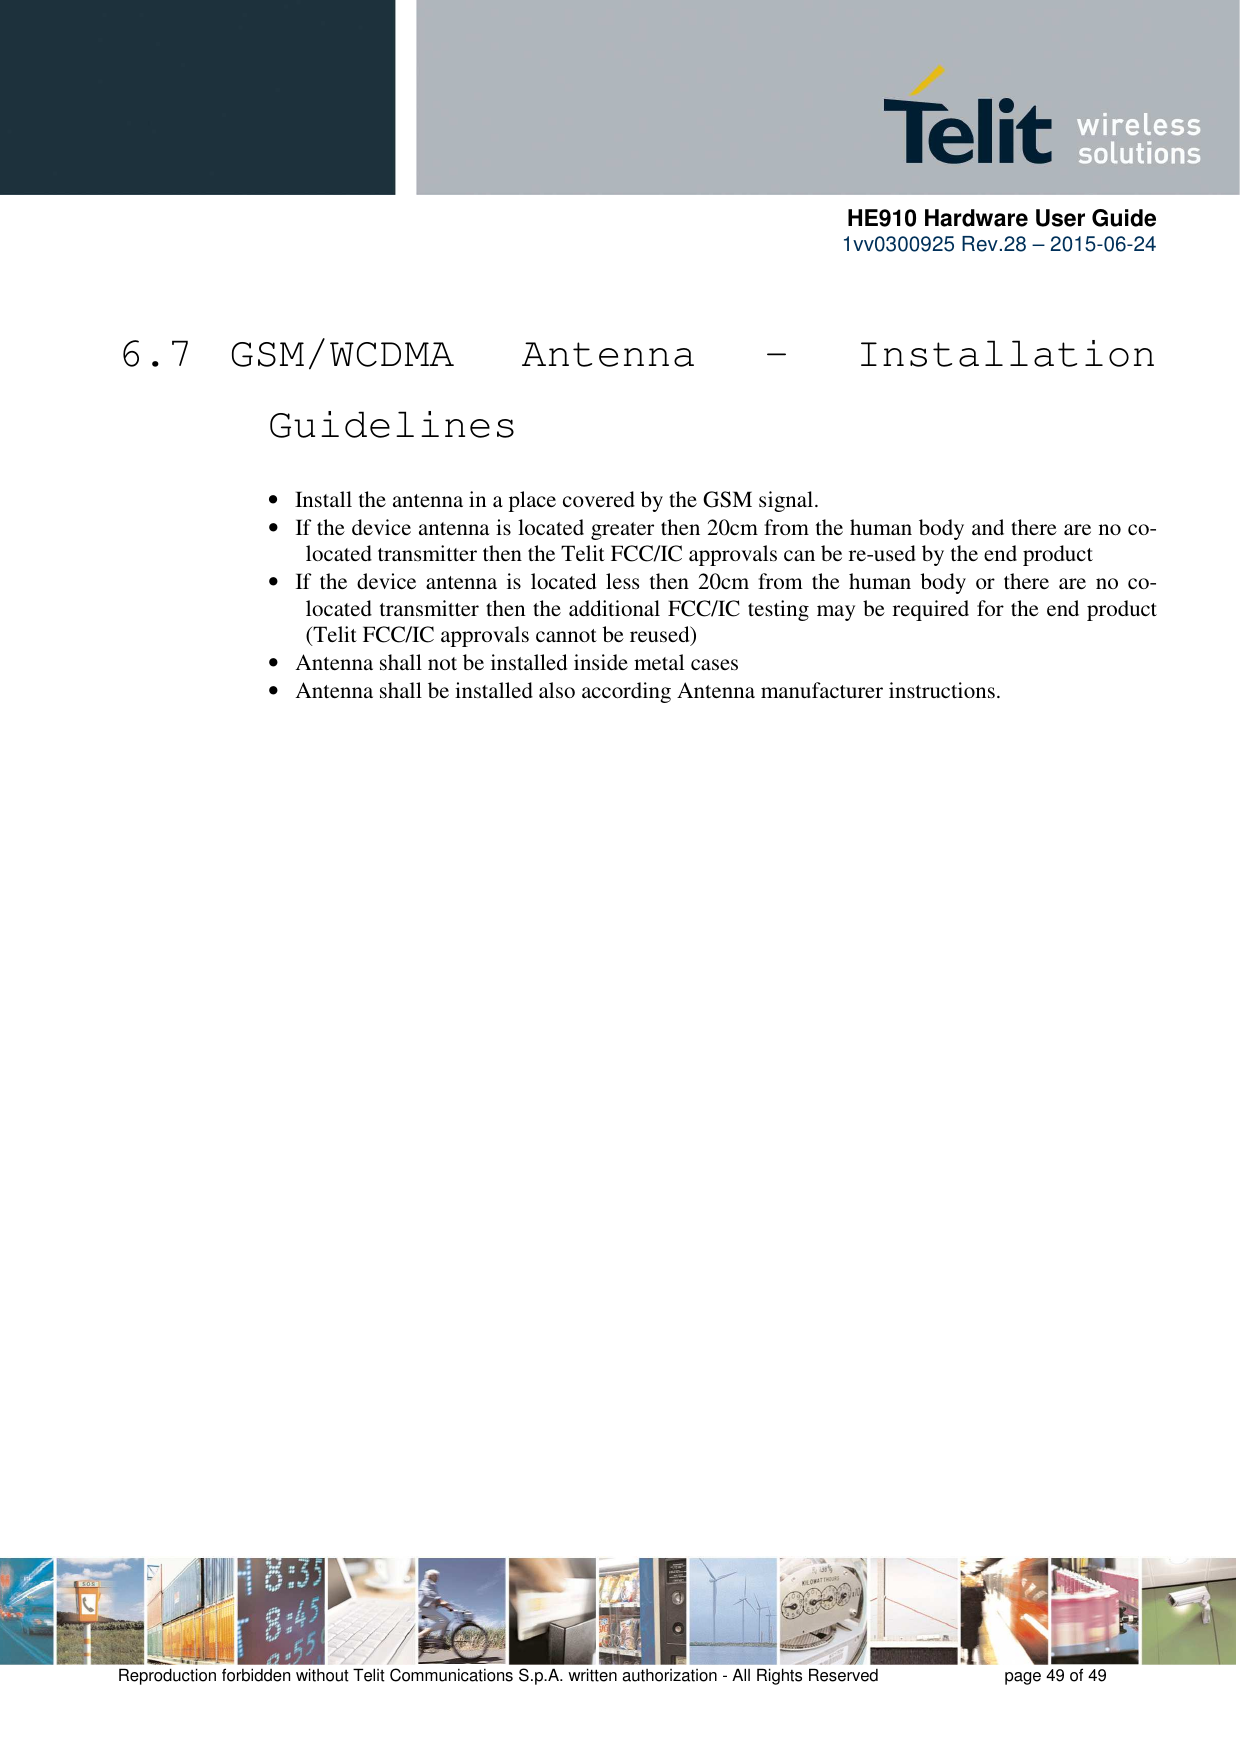      HE910 Hardware User Guide 1vv0300925 Rev.28 – 2015-06-24    Reproduction forbidden without Telit Communications S.p.A. written authorization - All Rights Reserved    page 49 of 49   6.7  GSM/WCDMA  Antenna  -  Installation Guidelines • Install the antenna in a place covered by the GSM signal. • If the device antenna is located greater then 20cm from the human body and there are no co-located transmitter then the Telit FCC/IC approvals can be re-used by the end product • If the  device antenna is located less then  20cm  from  the human body or there are  no  co-located transmitter then the additional FCC/IC testing may be required for the end product (Telit FCC/IC approvals cannot be reused) • Antenna shall not be installed inside metal cases  • Antenna shall be installed also according Antenna manufacturer instructions. 